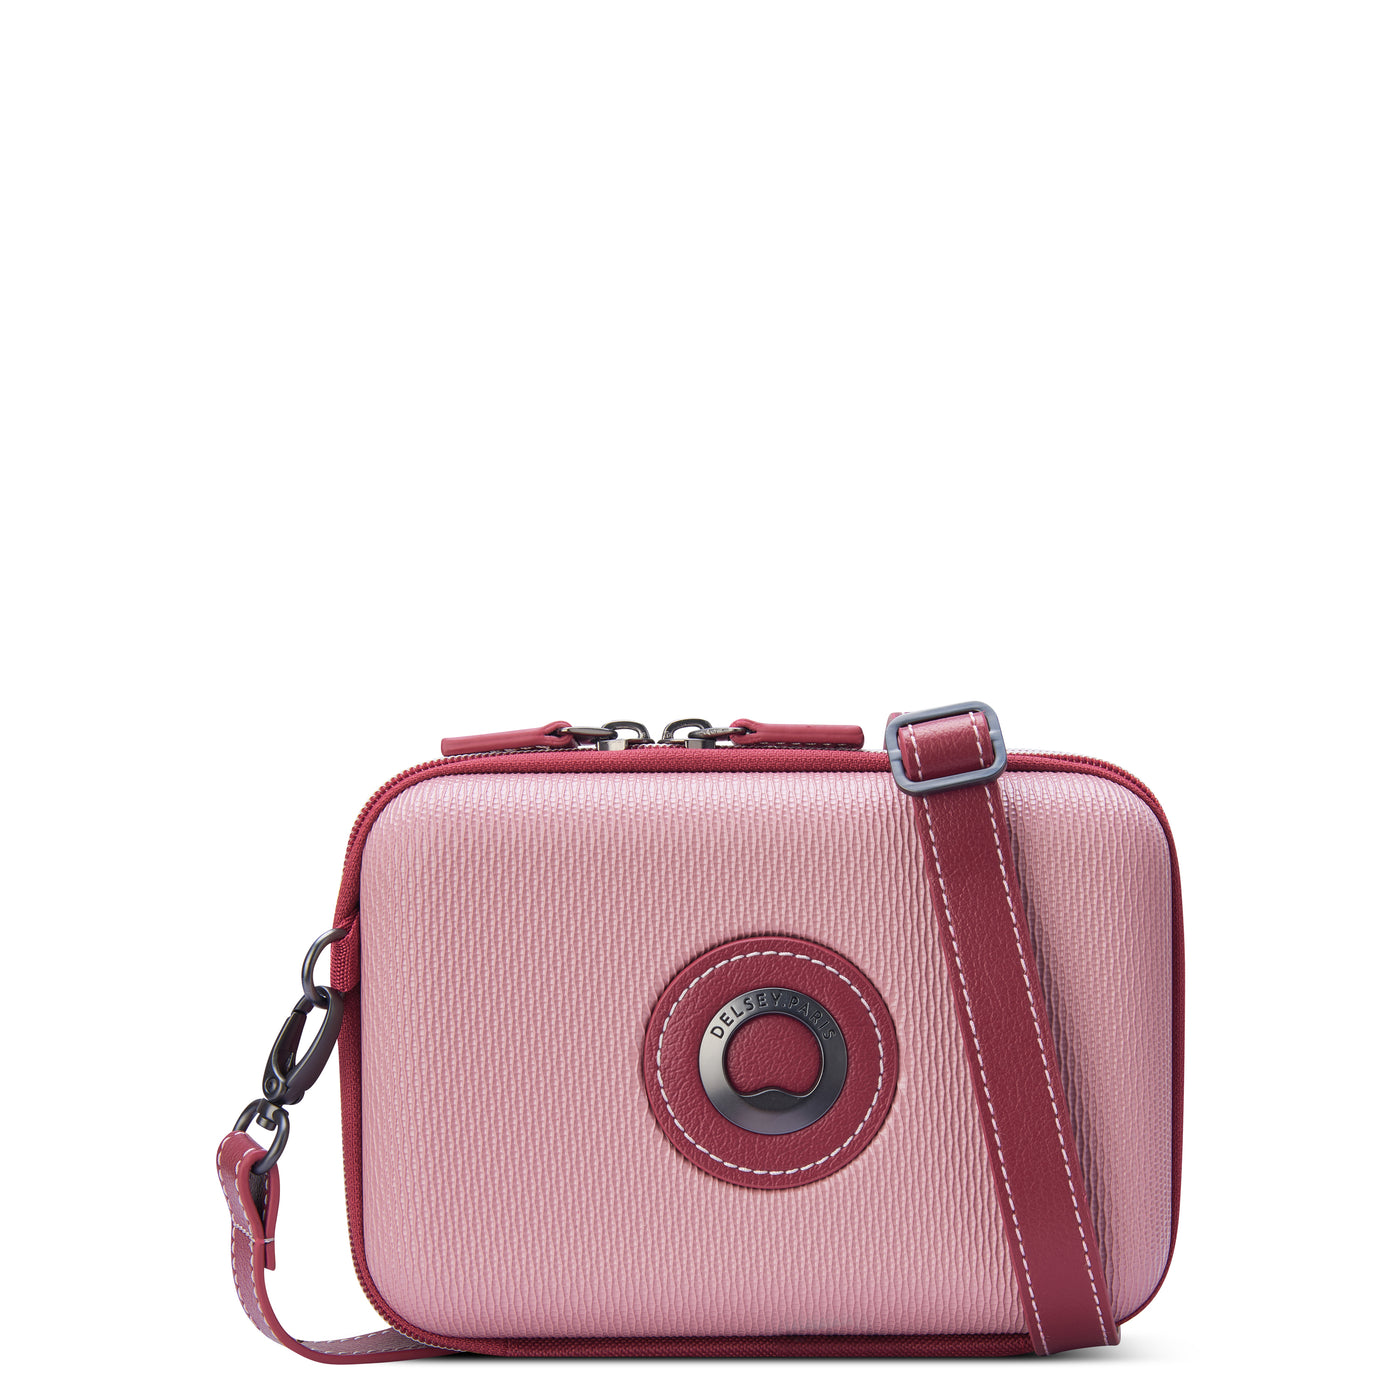 Shop The Latest Collection Of Delsey Chatelet Air 2.0 Clutch In Lebanon